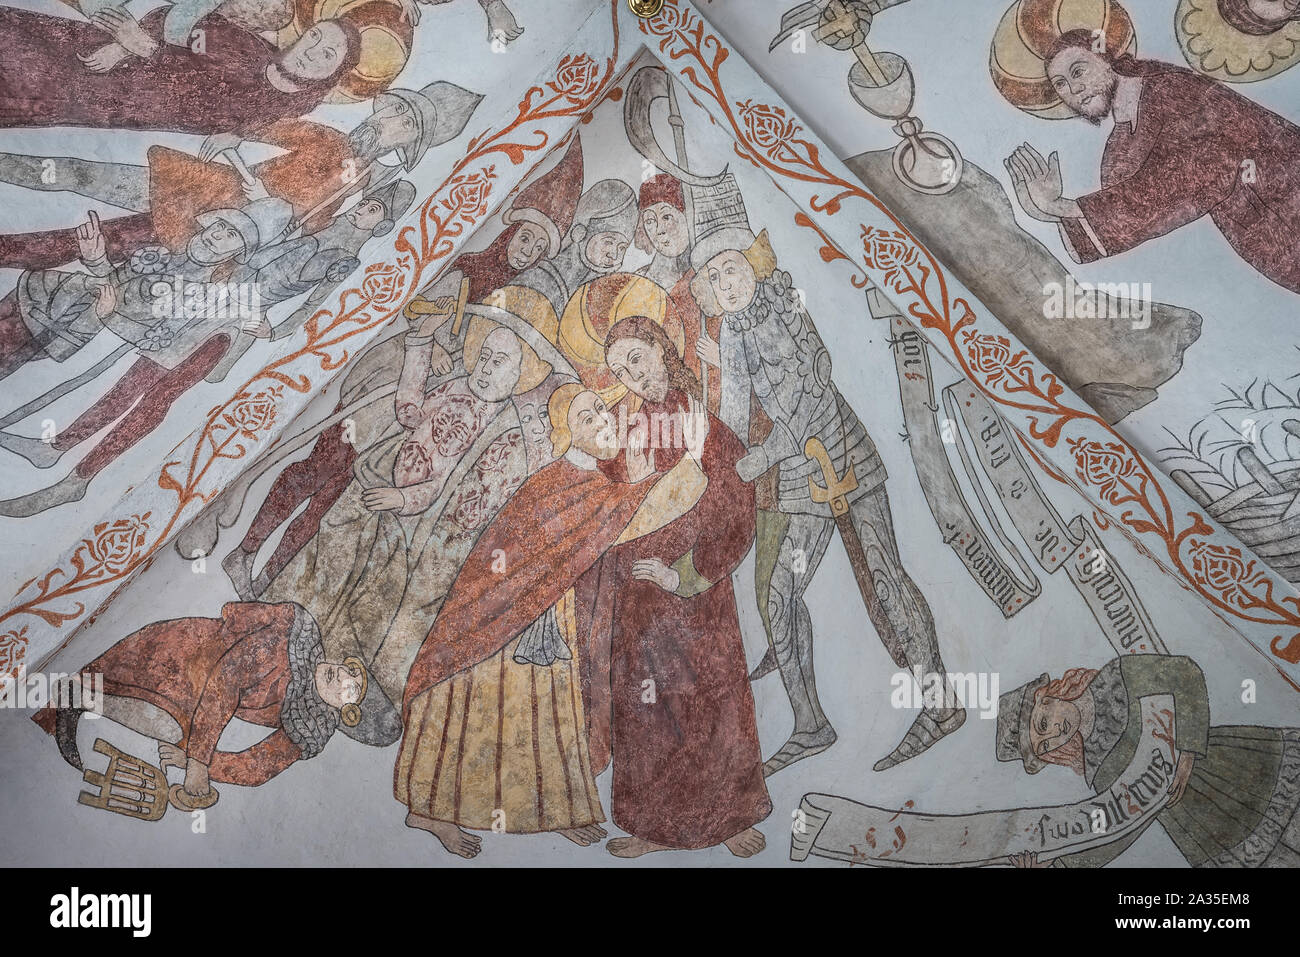 the Betrayal of Christ, a wall-painting from about the year 1500 in the church of St. Mary, Elsinore, Denmark, May 14, 2019 Stock Photo